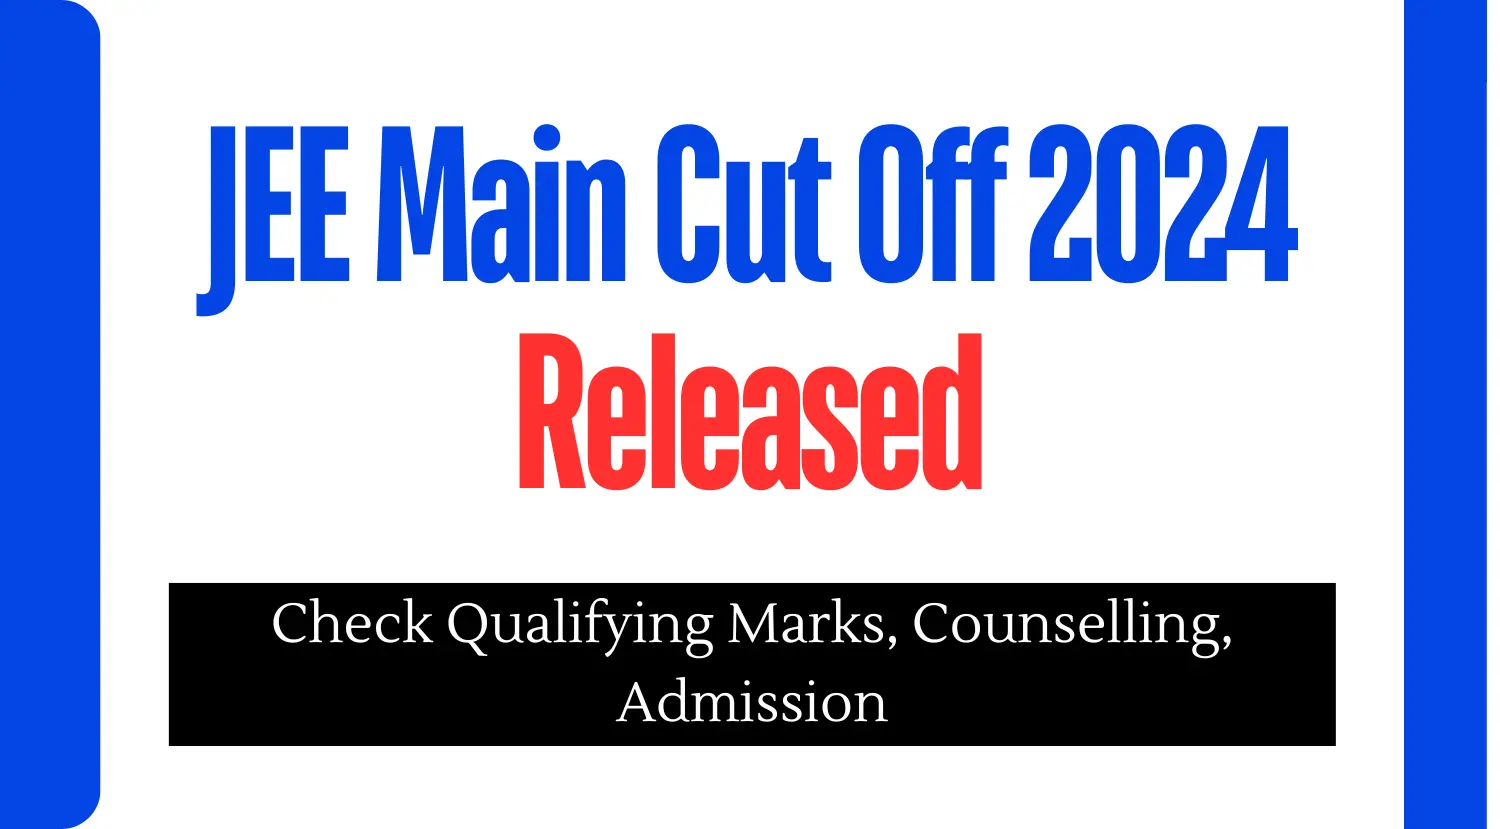 JEE Main Cut Off 2024 Released Check Qualifying Marks Counselling Admission